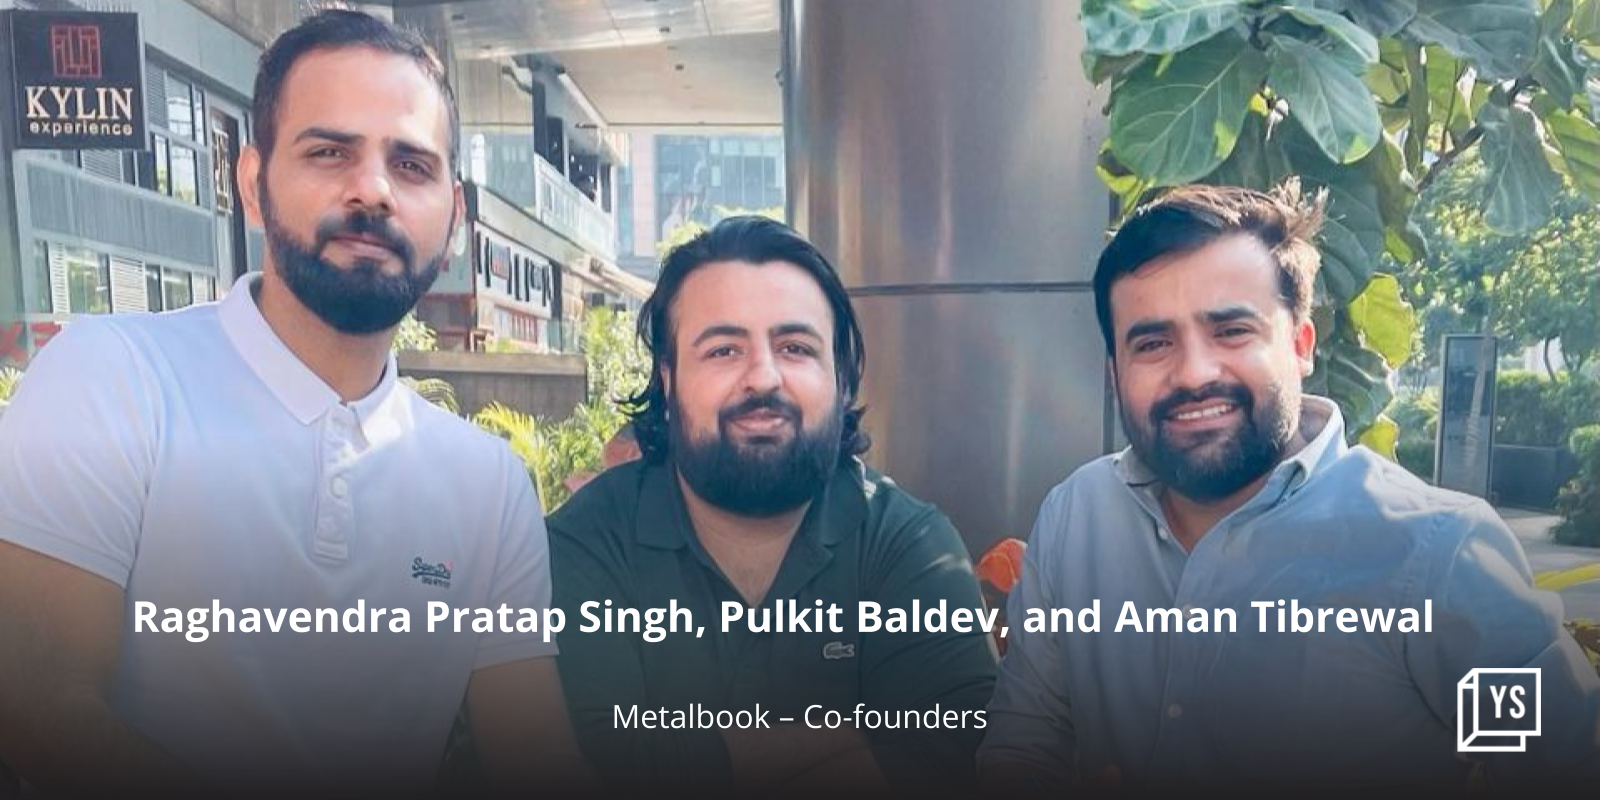 Supply chain platform Metalbook secures $15M in Series A funding round led by Rigel Capital